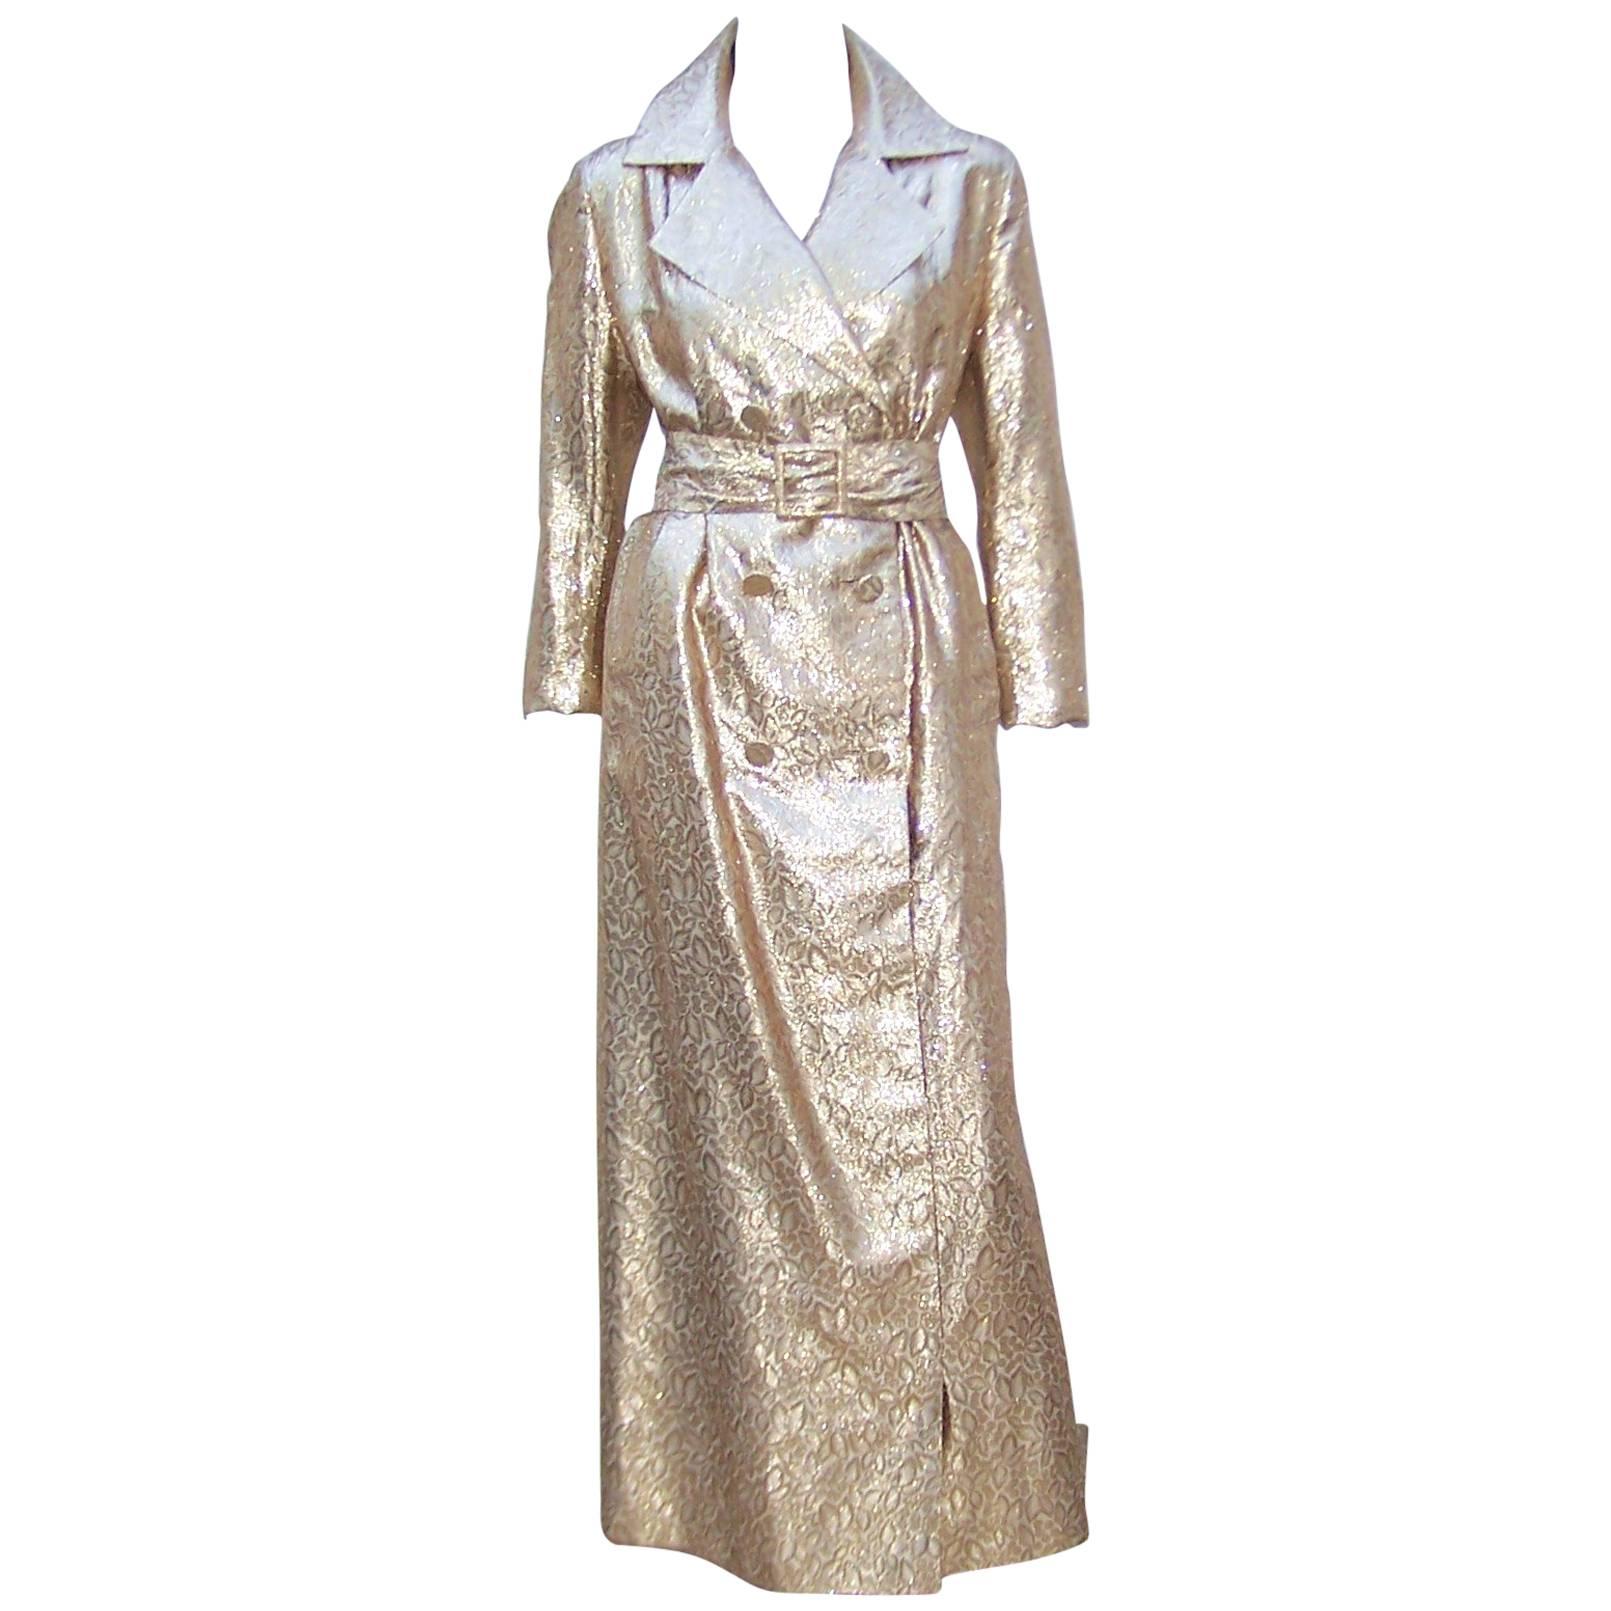 Glam 1960's Lawrence of London Gold Trench Coat Style Dress